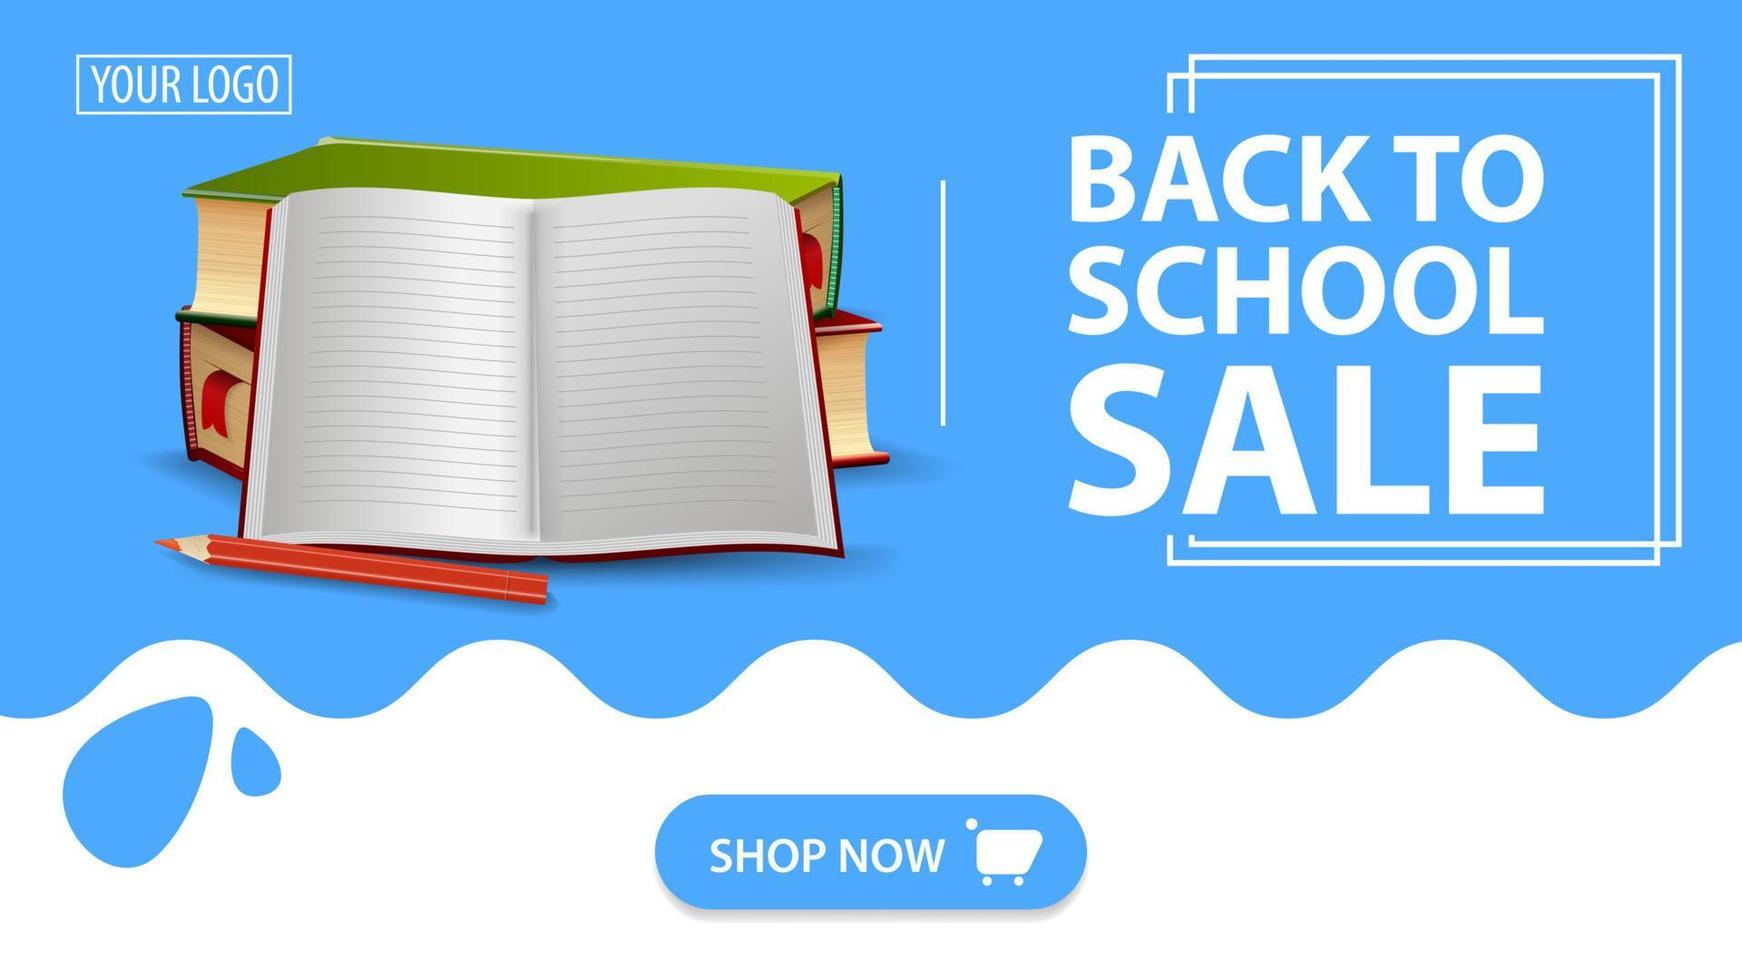 Back to school sale, red banner with school textbooks and notebook vector